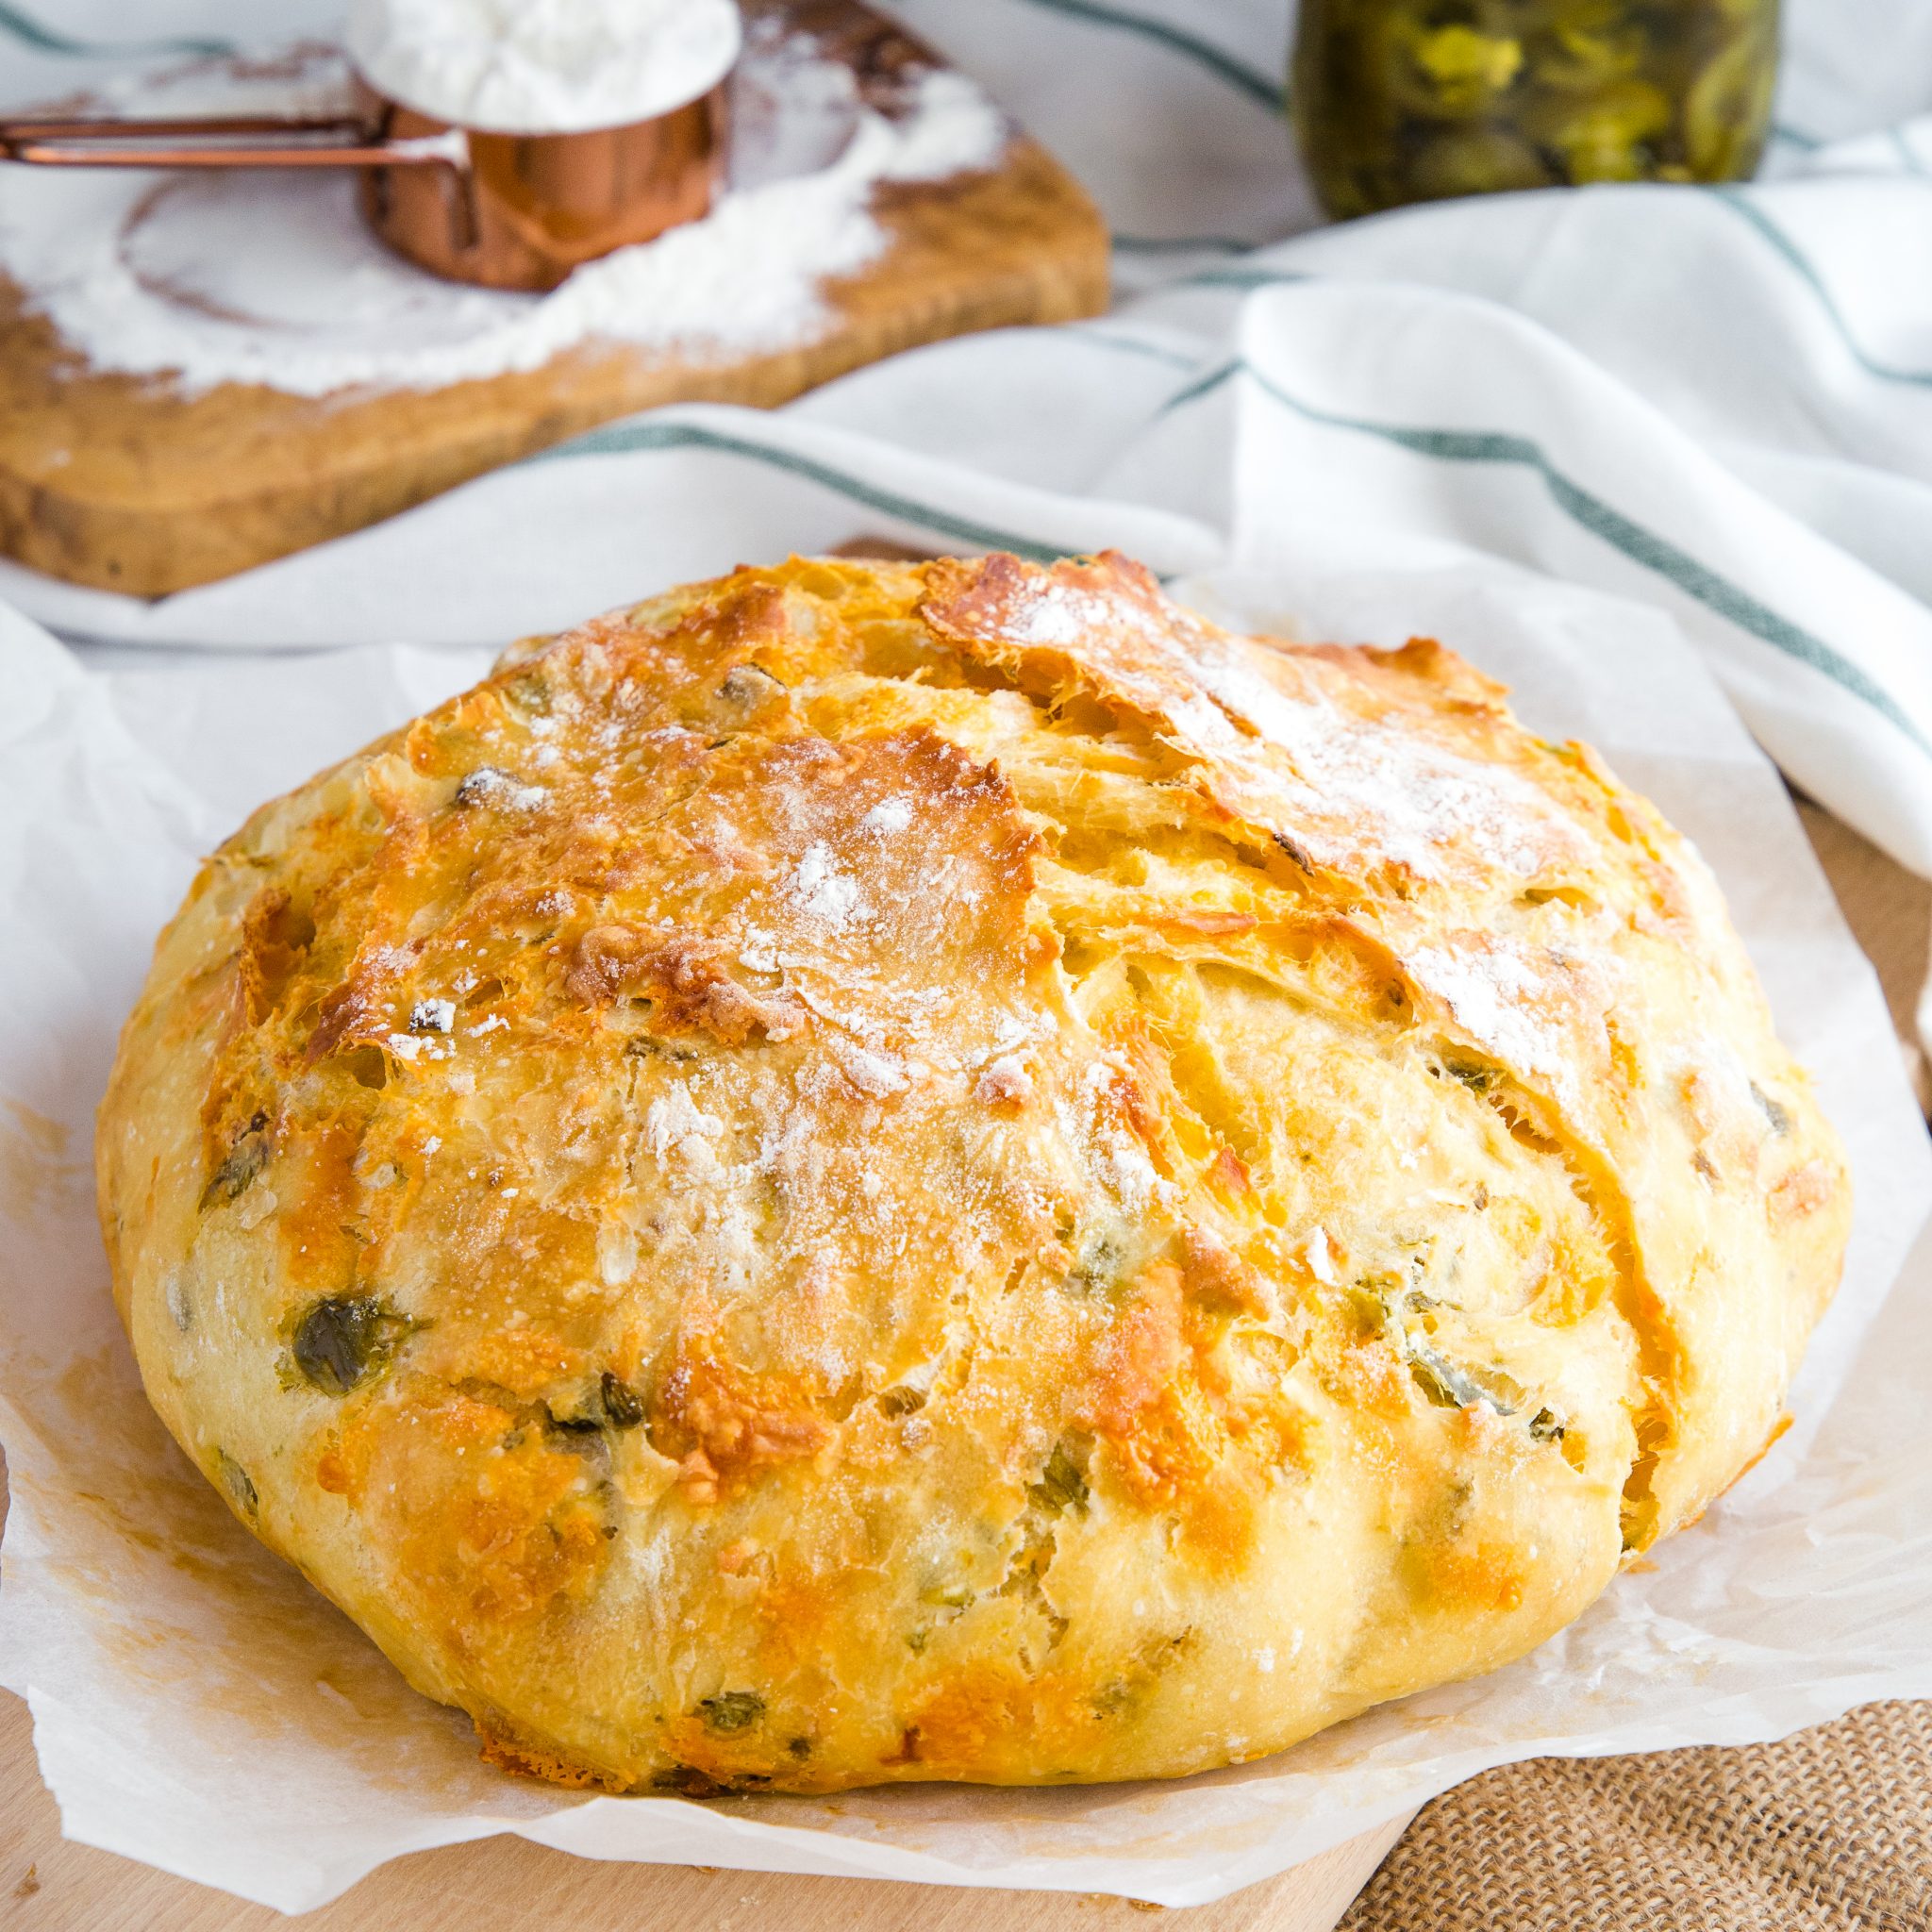 Jalapeno Cheddar Dutch Oven Bread (no knead!) - The Chunky Chef